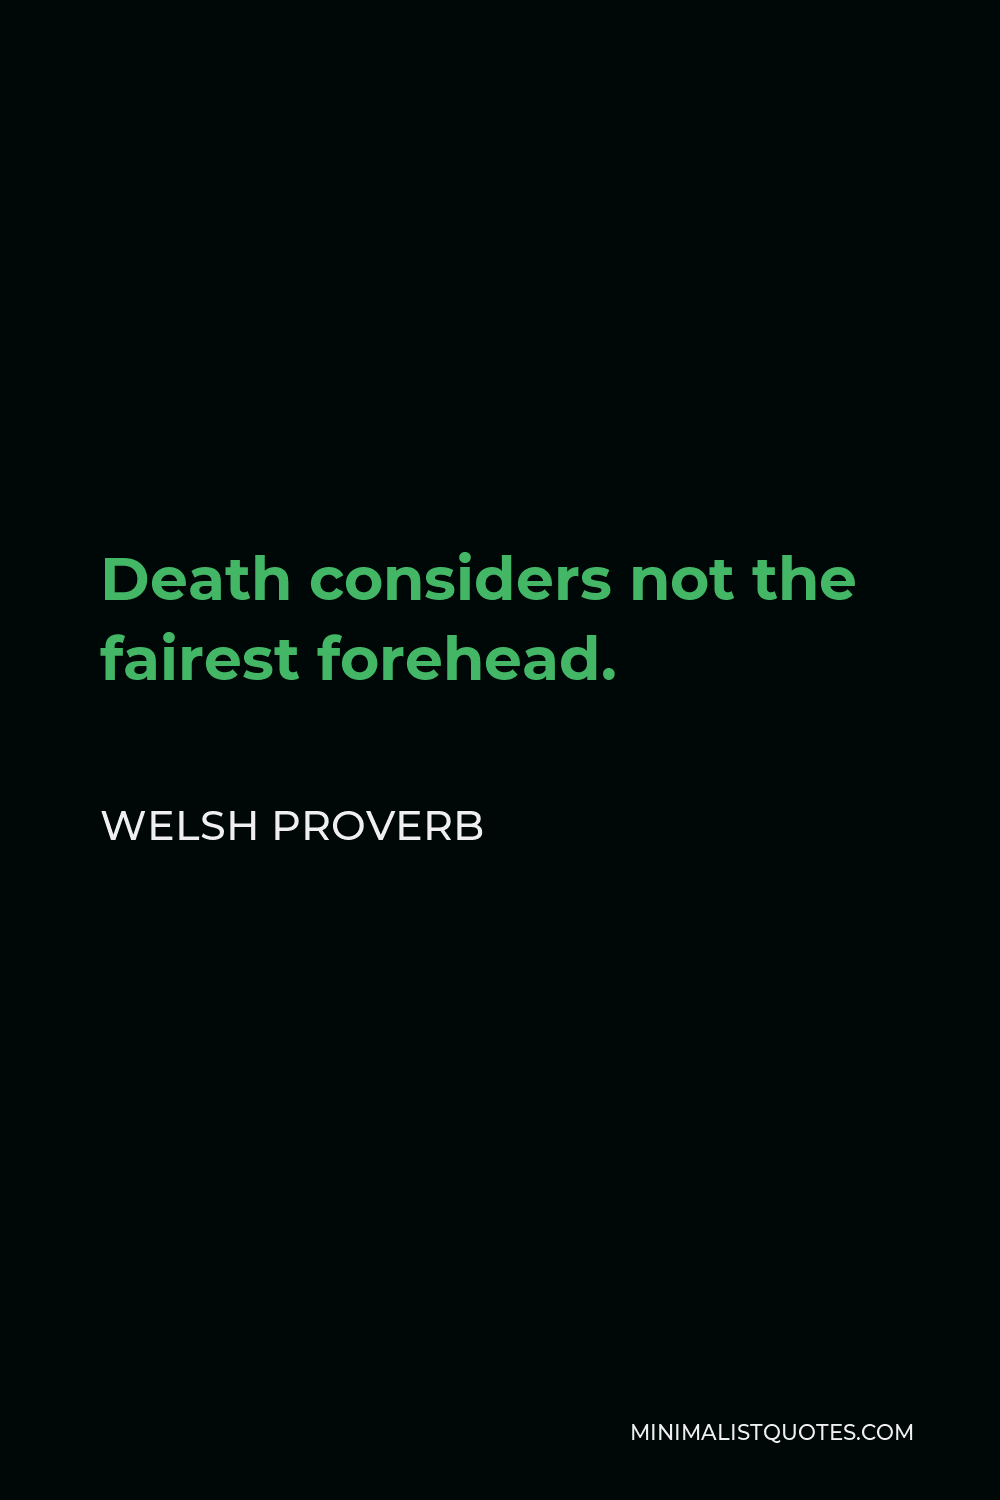 Welsh Proverb Quote - Death considers not the fairest forehead.